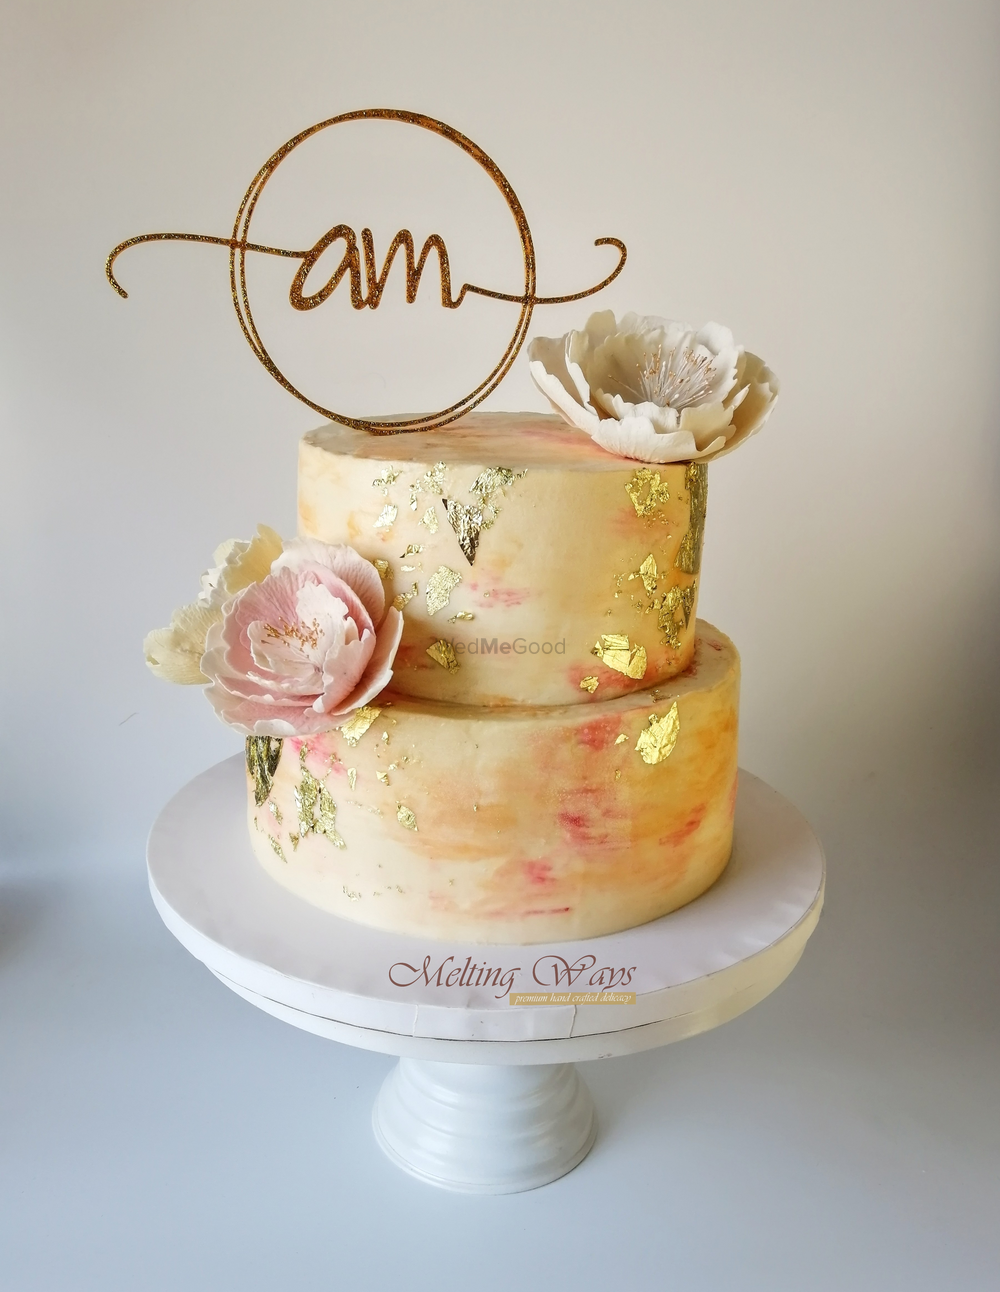 Photo From Wedding / Engagement /Bride to be Cakes - By MeltingWays